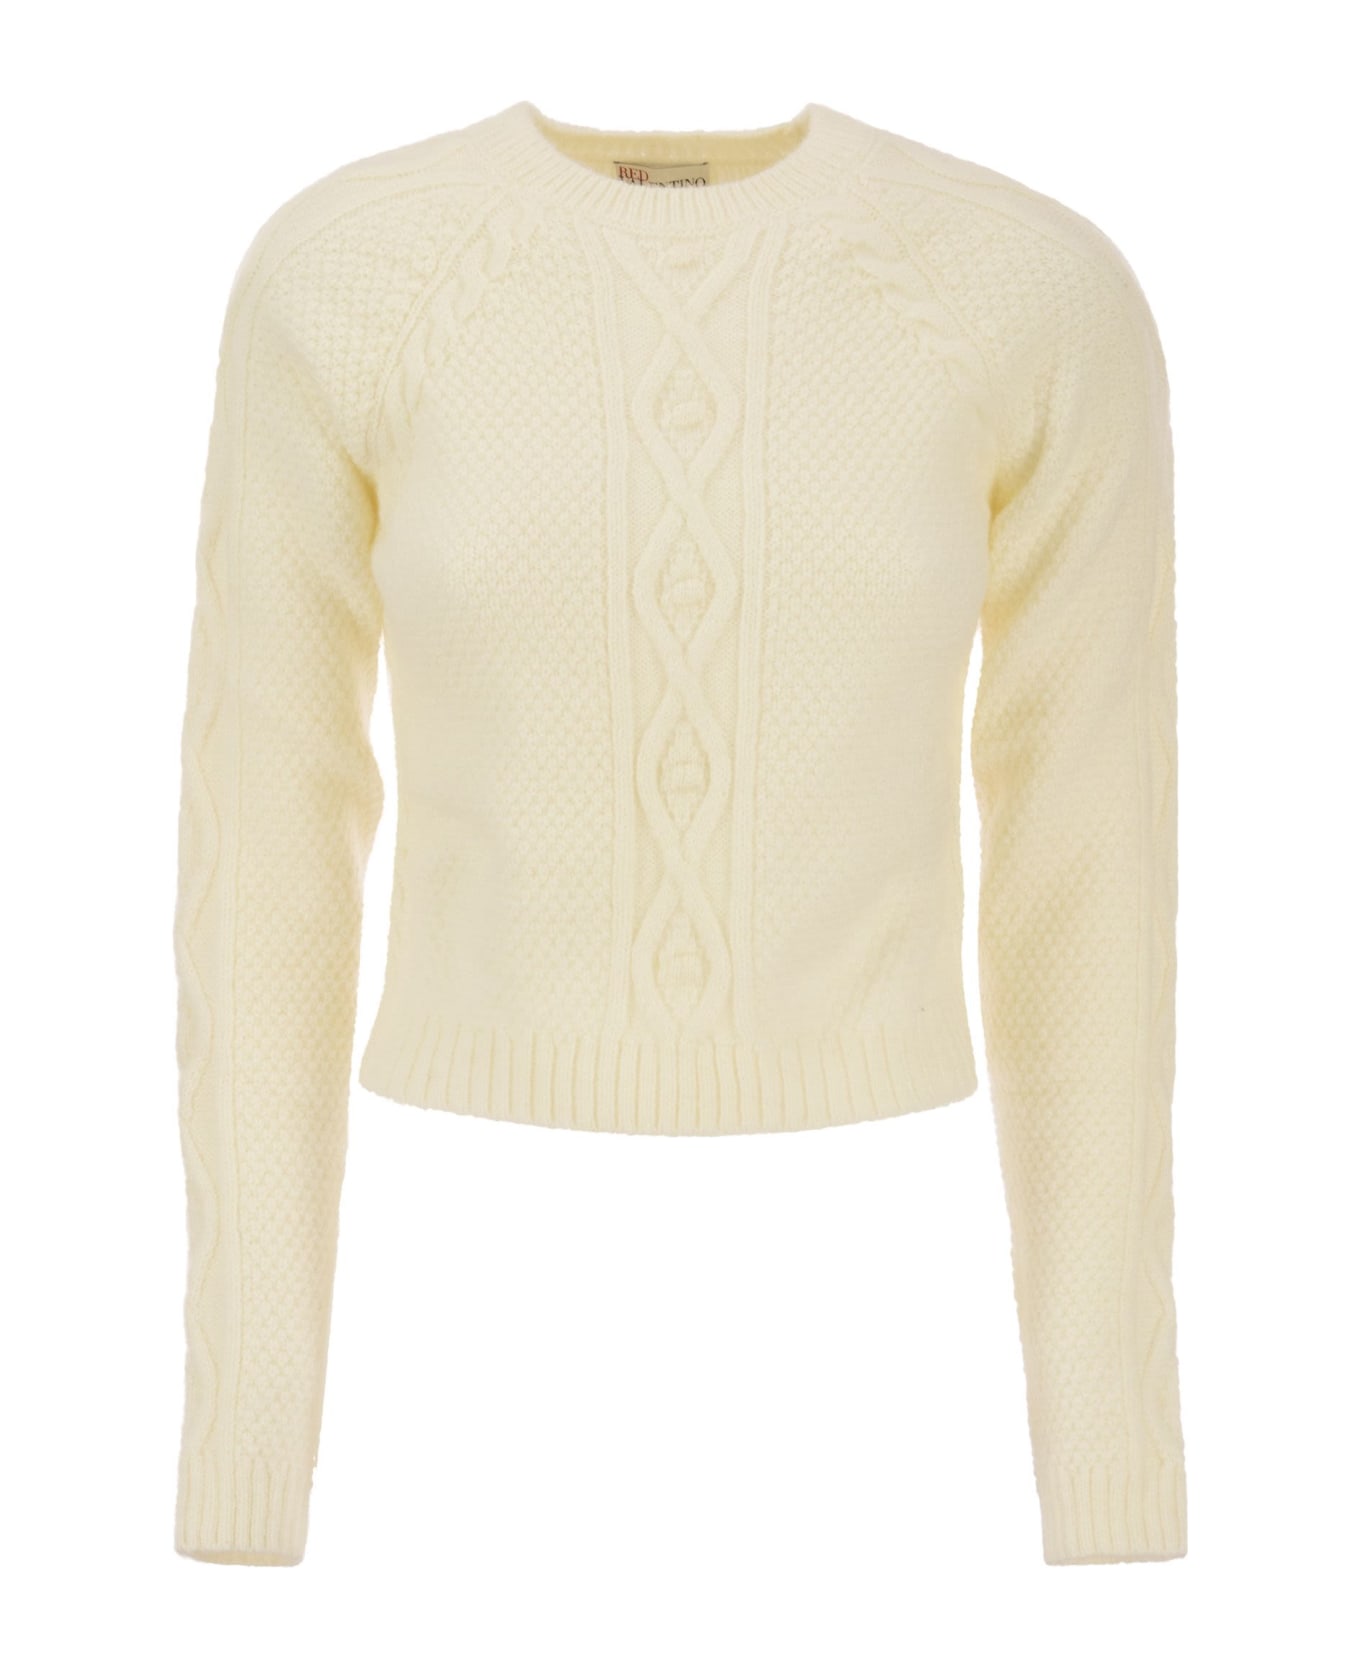 RED Valentino Mohair-blend Crew Neck - Ivory